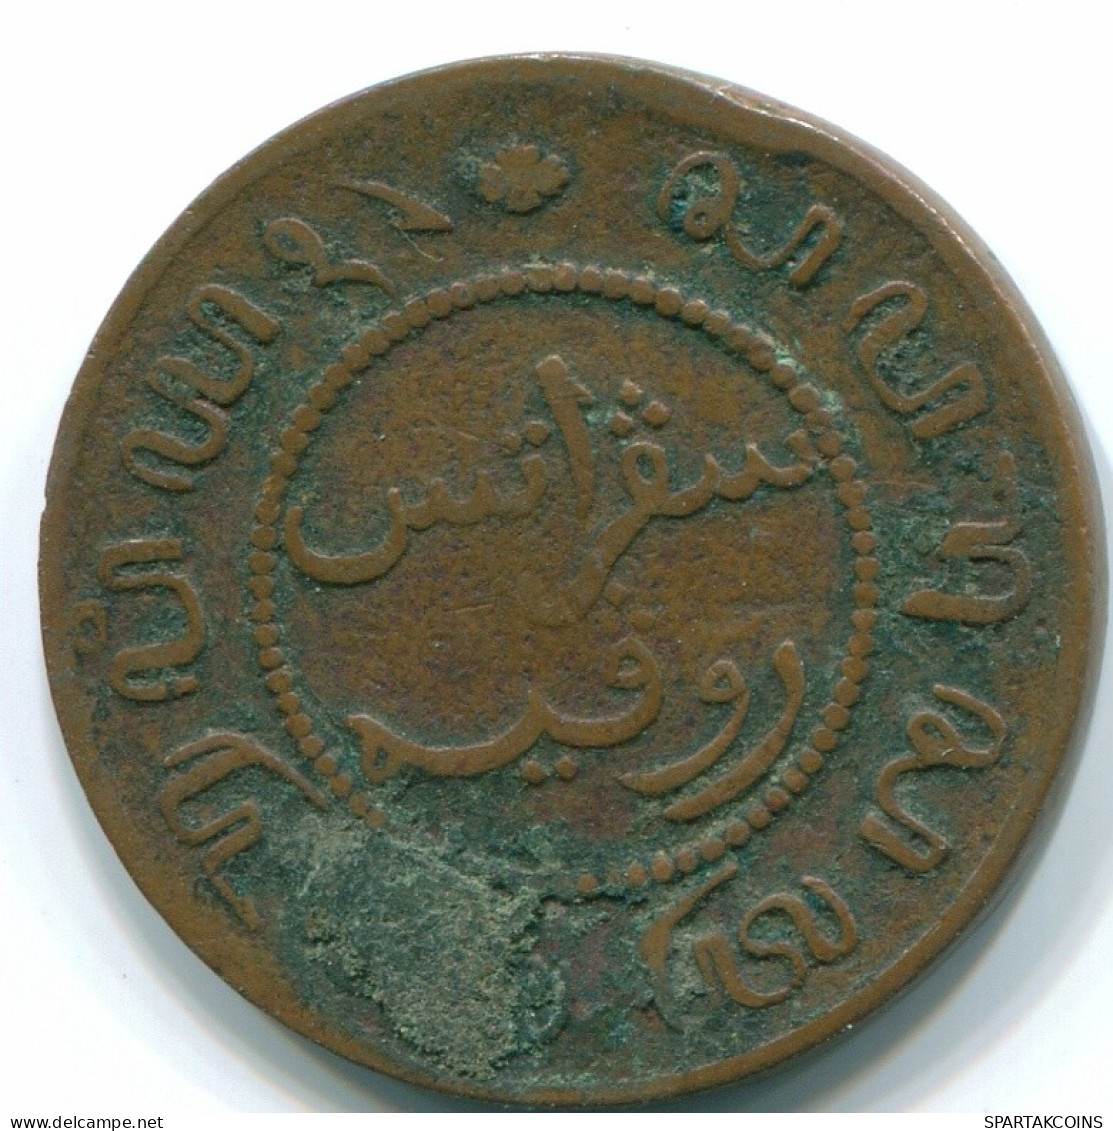 1 CENT 1856 NETHERLANDS EAST INDIES INDONESIA Copper Colonial Coin #S10017.U.A - Dutch East Indies